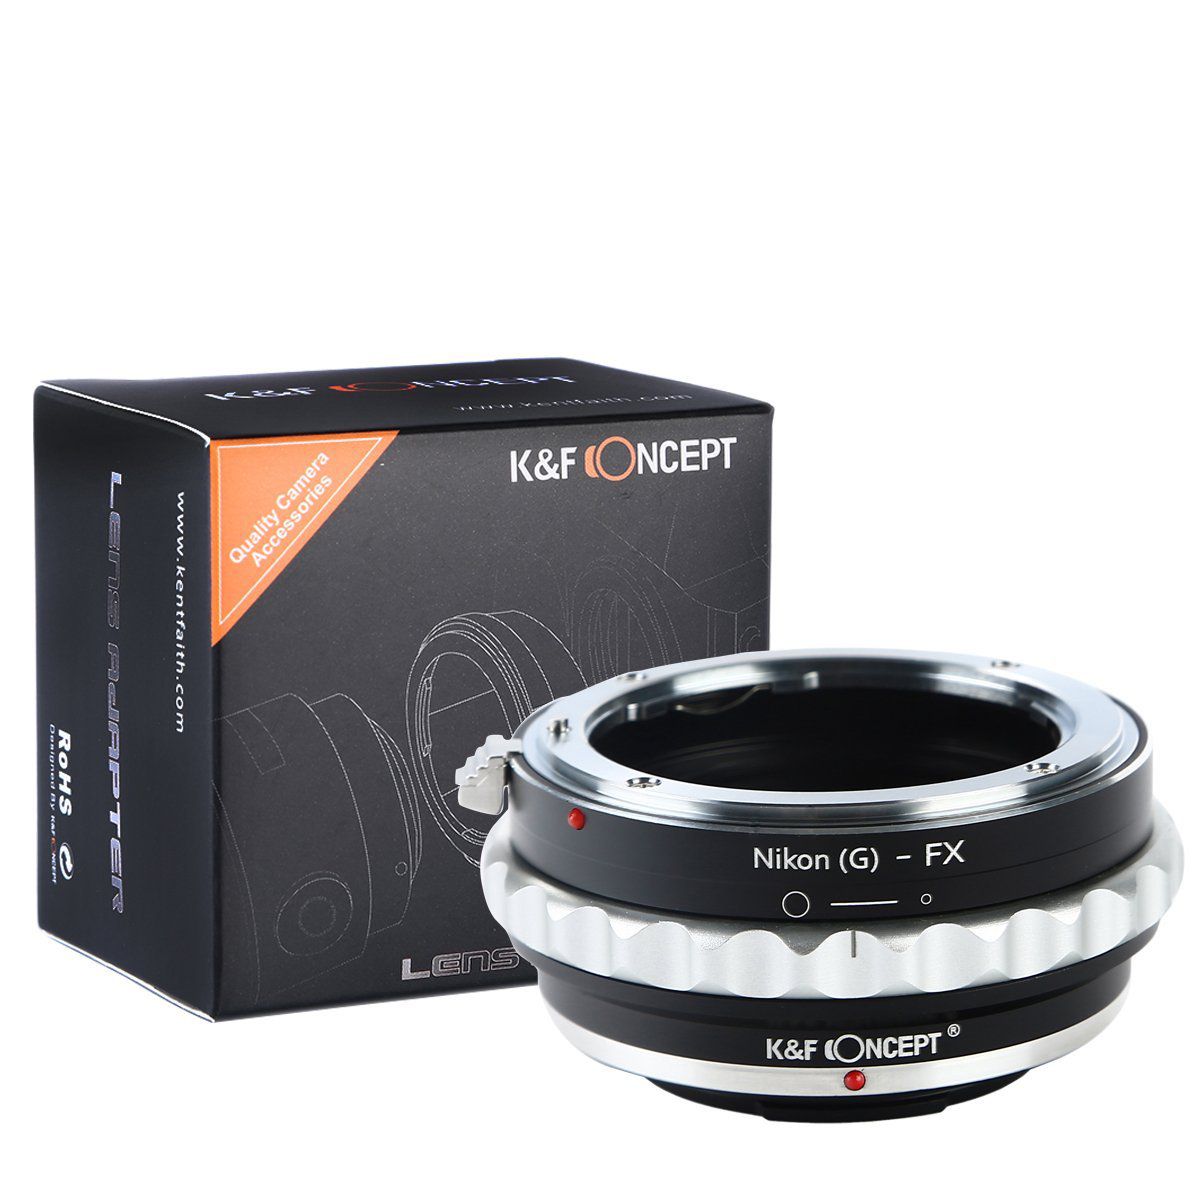 K F Concept Camera Lens Adapter Ring For Nikon G Af S Mount Lens To Fujifilm Fuji Fx X Pro1 X M1 X A1 X E1 Adapter Price In India Buy K F Concept Camera Lens Adapter Ring For